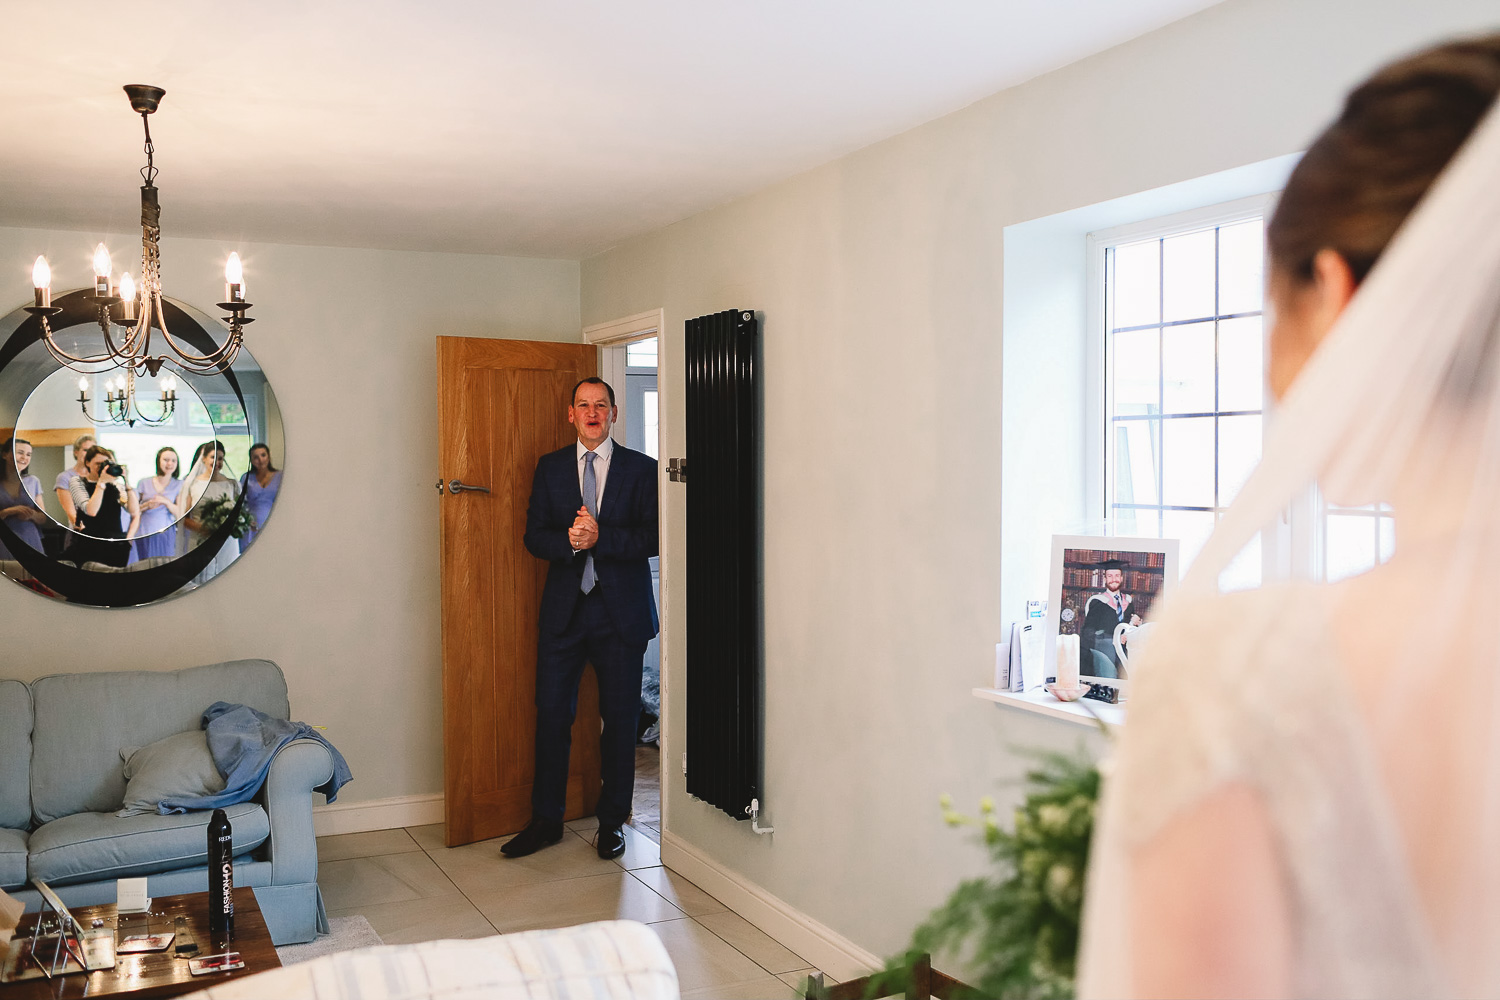 Dad sees bride for the first time and has the most happy and emotional look on his face as he walks in the room at relaxed Sheffield wedding